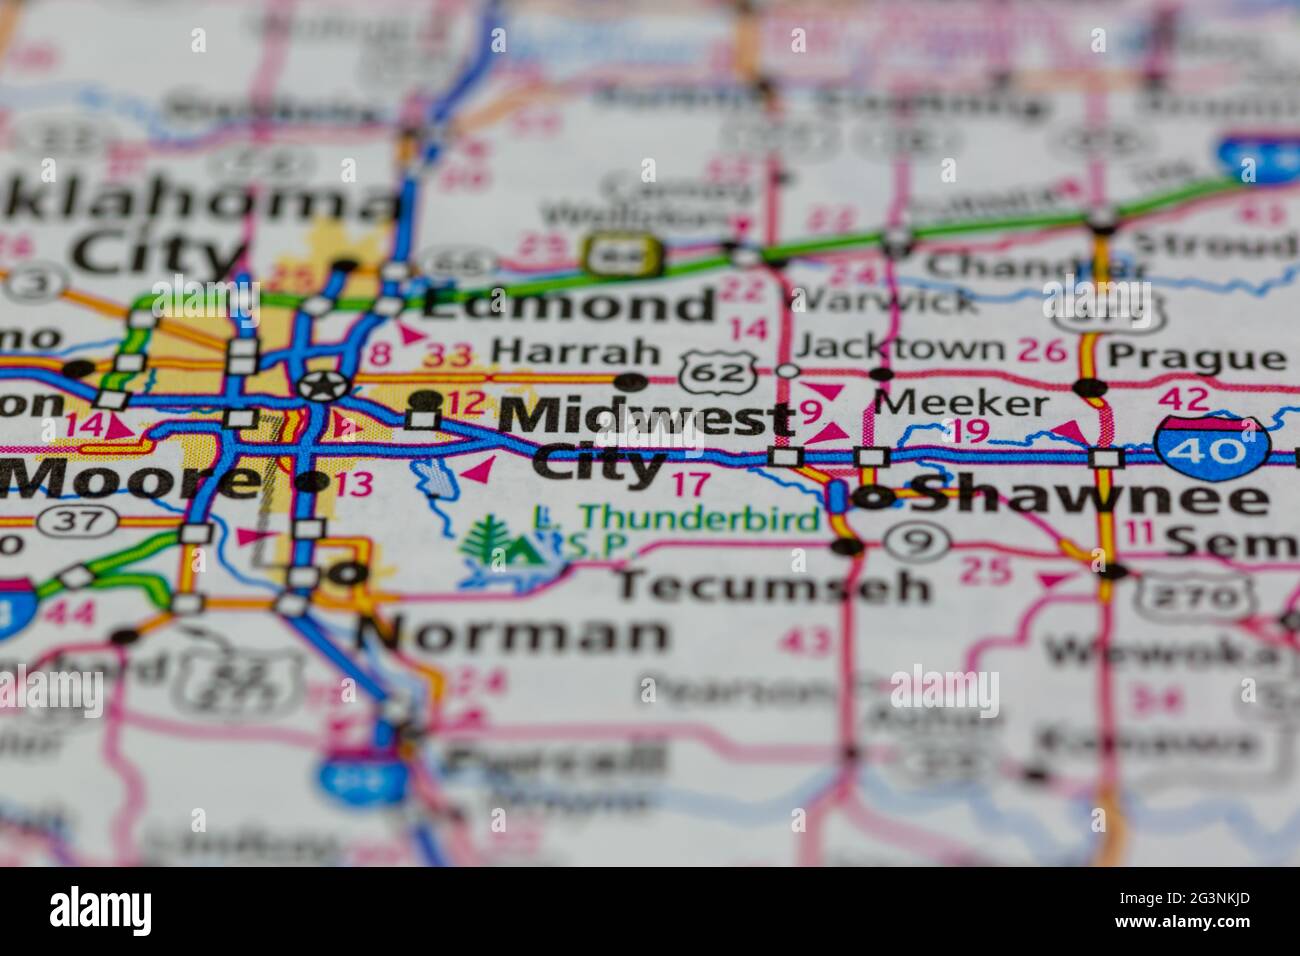 Midwest City Oklahoma USA shown on a Geography map or road map Stock Photo